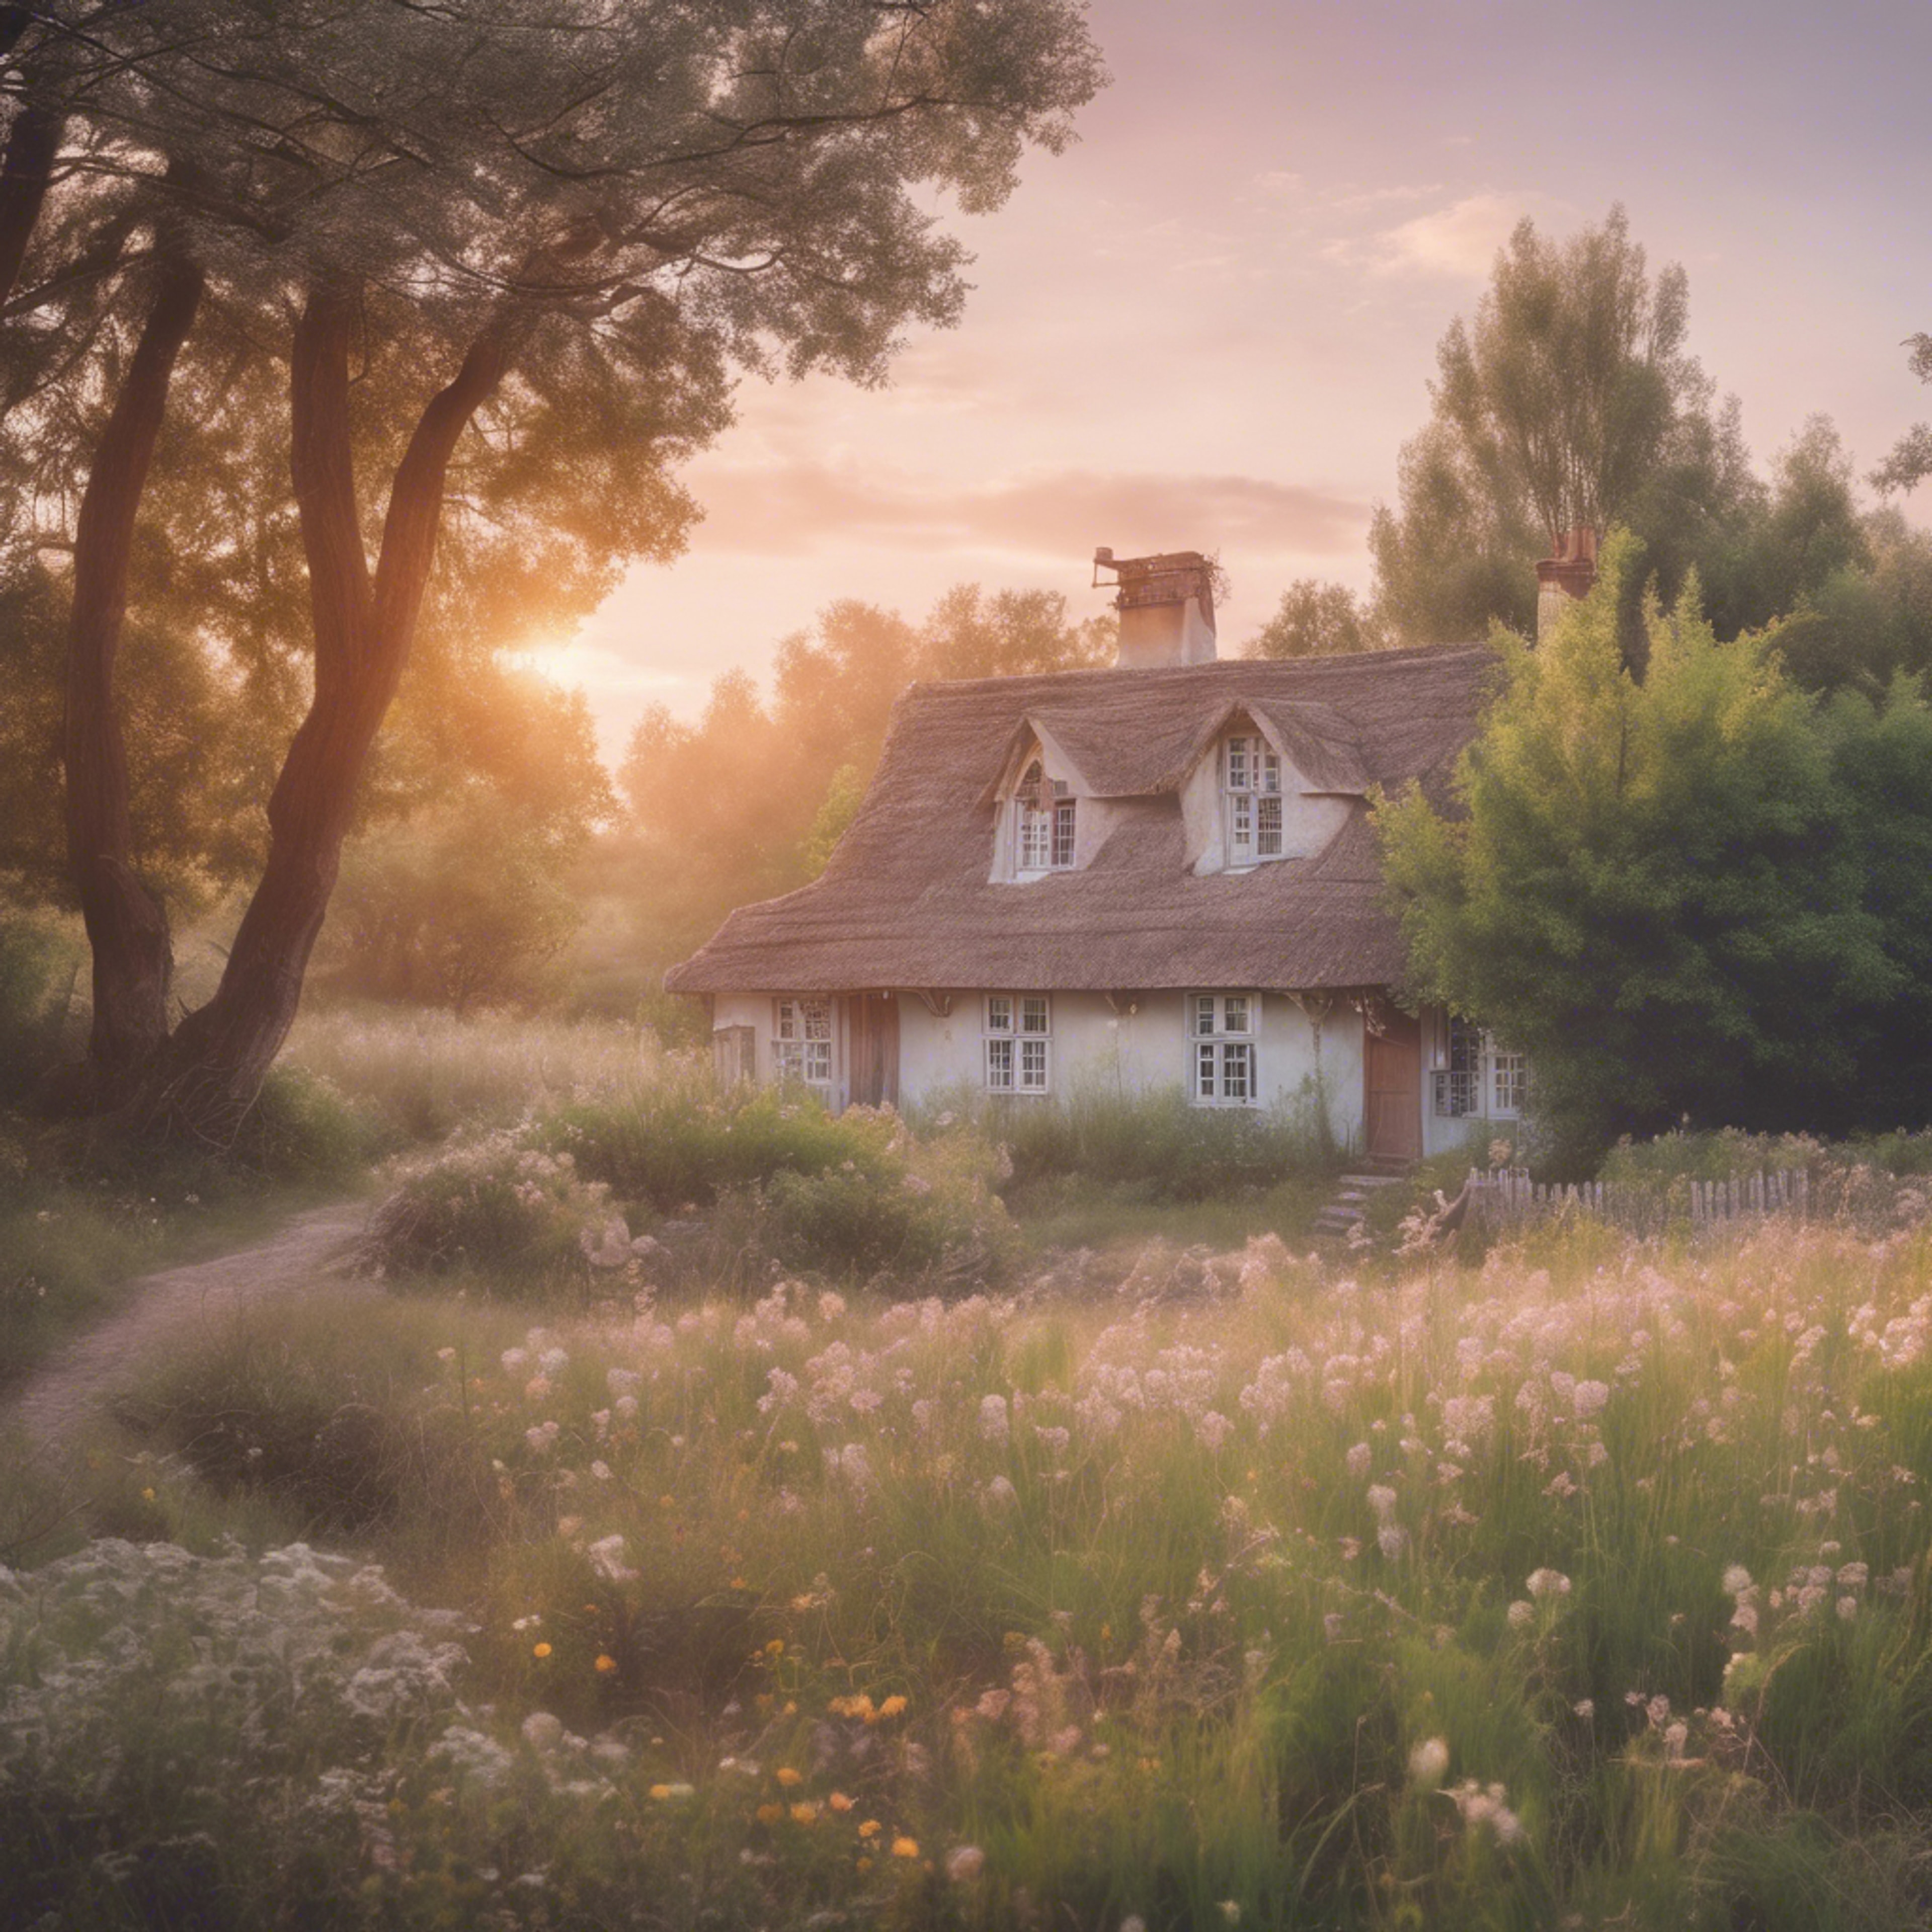 A soft pastel sunrise over rustic cottages, birthing ethereal aesthetic beauty Ფონი[daea3b7a39e14a169eb1]